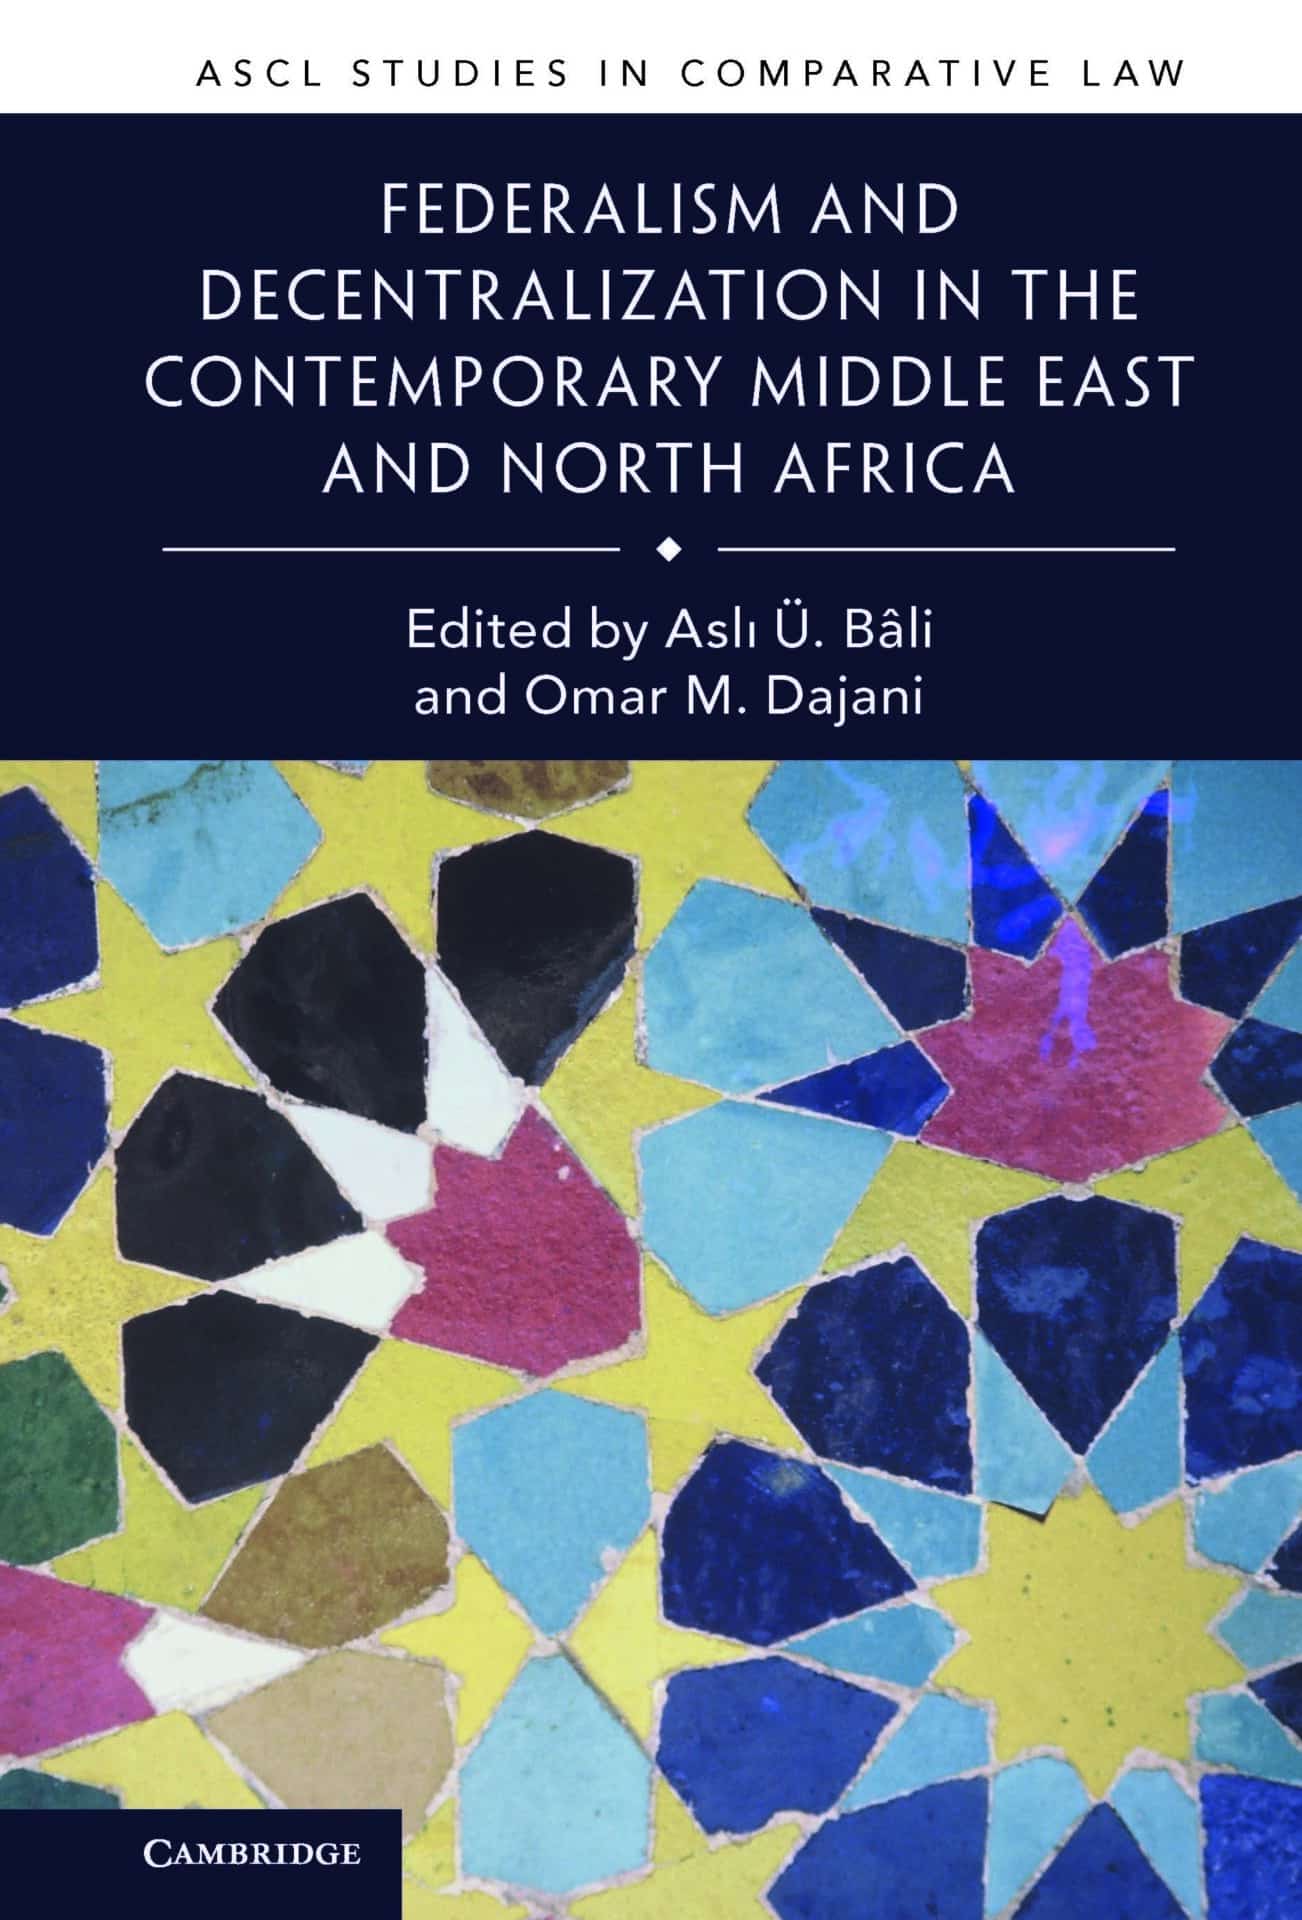 Federalism and Decentralization in the Contemporary Middle East and North Africa